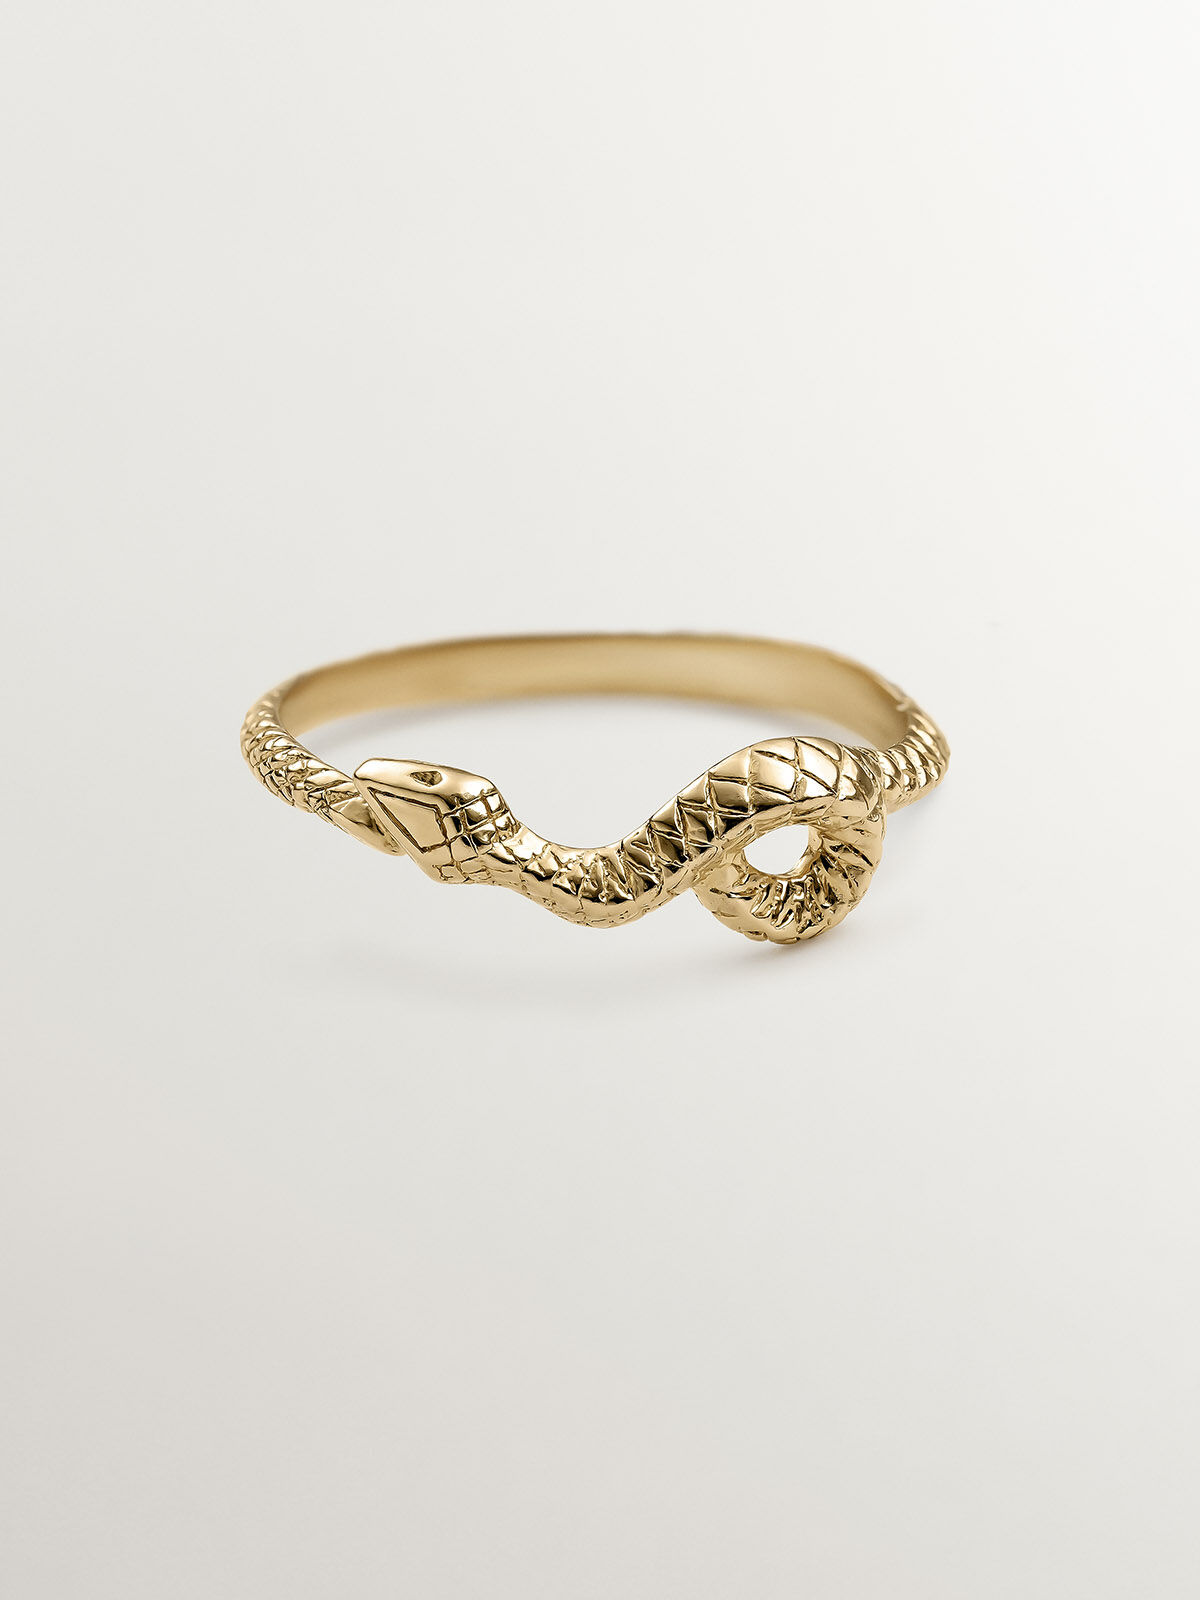 926 Silver ring coated in 18K yellow gold with a snake-shaped 